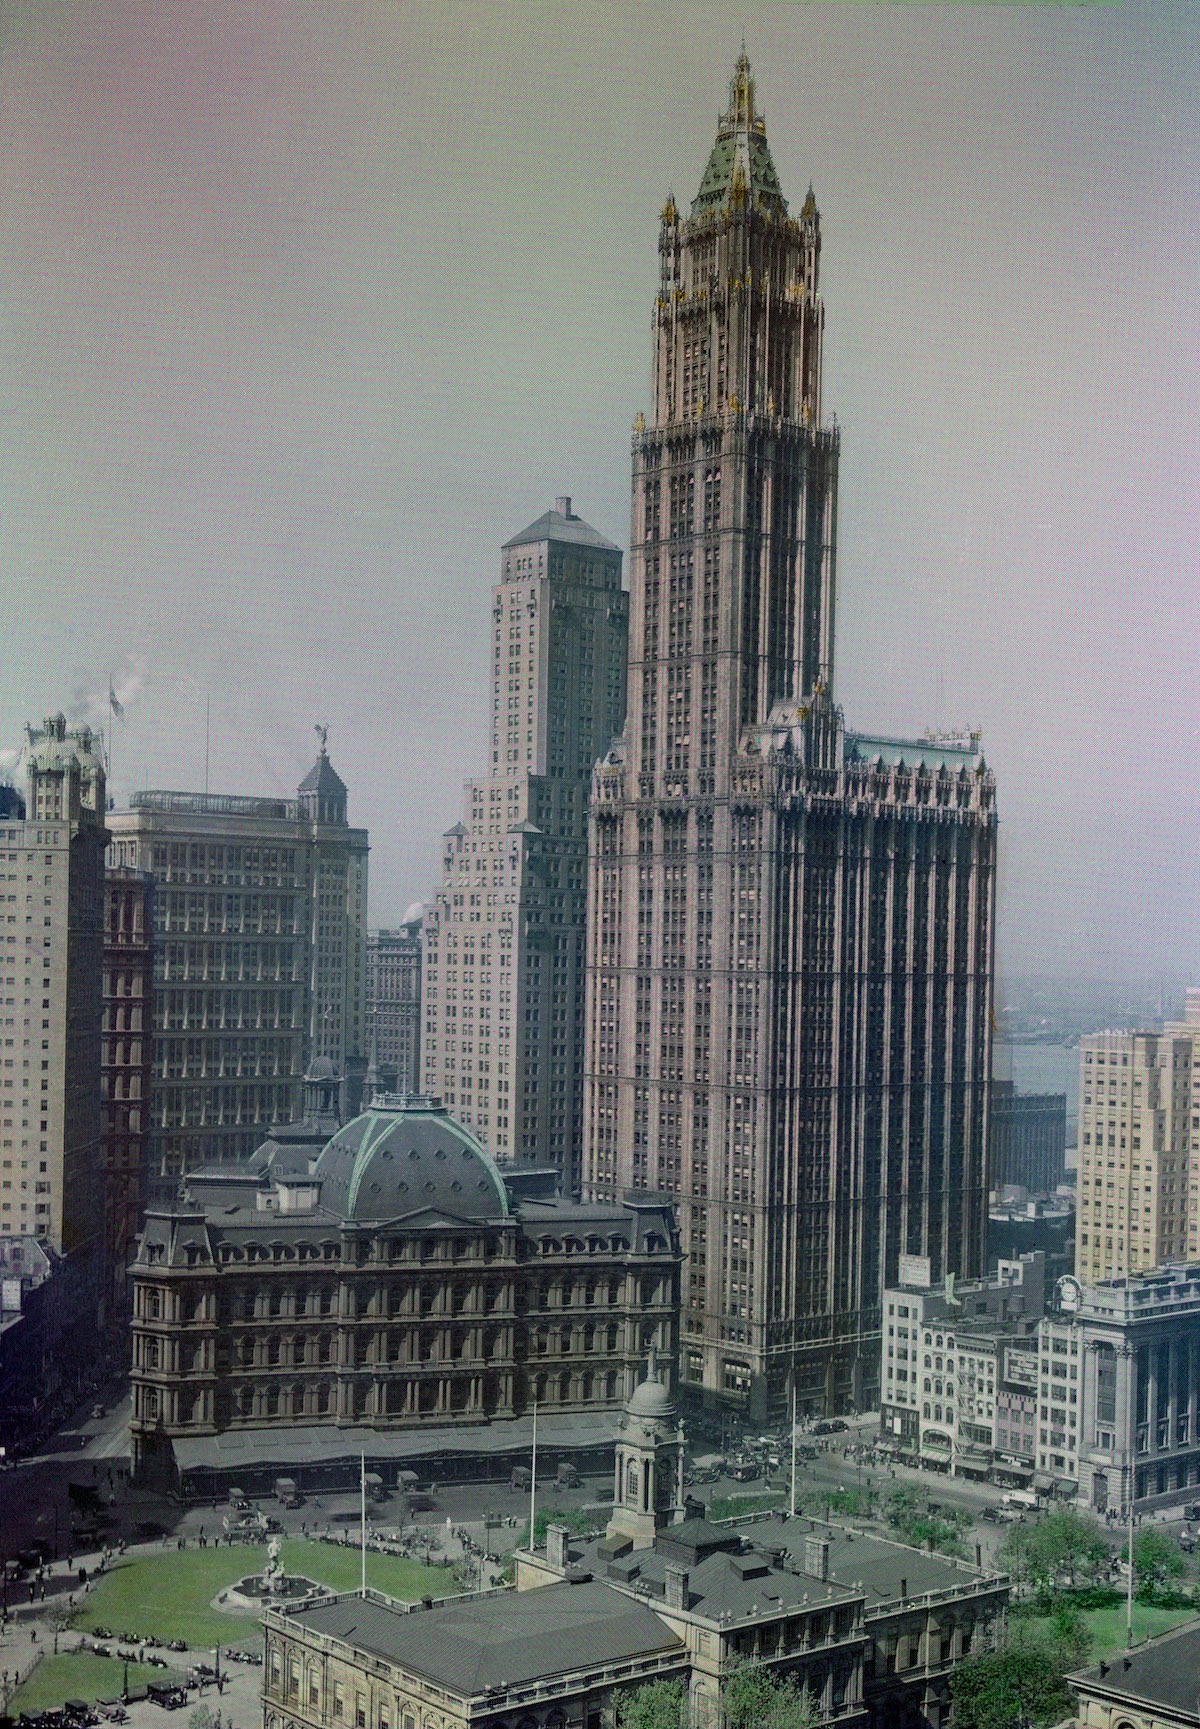 The sixty-story Woolworth Building rises on the New York skyline.